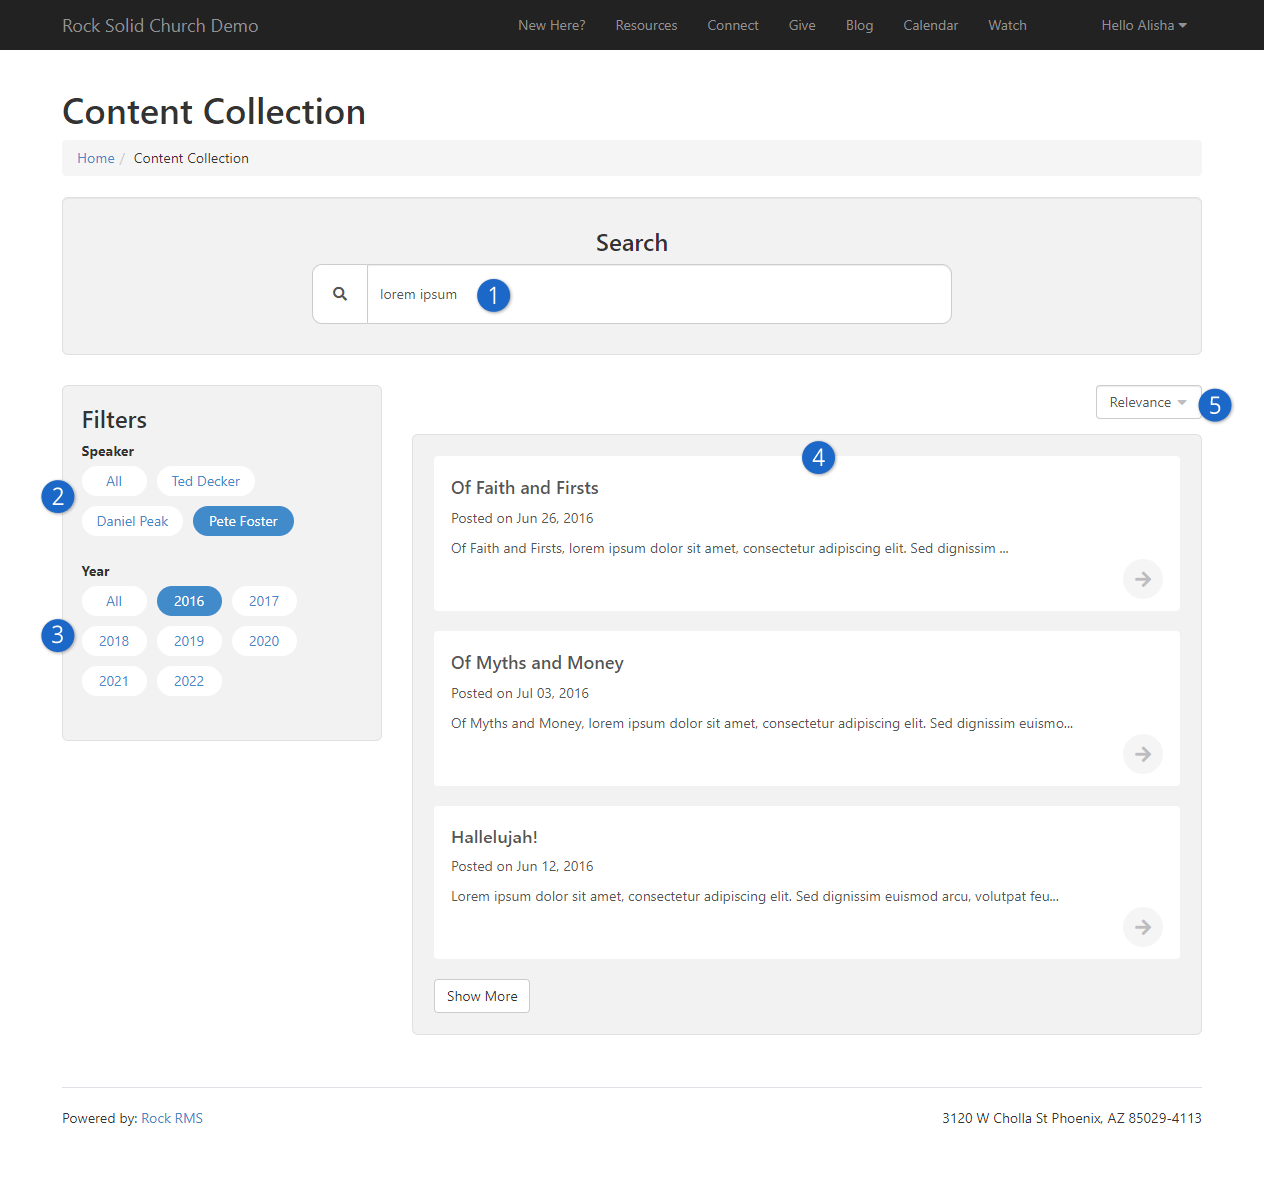 Content Collection View